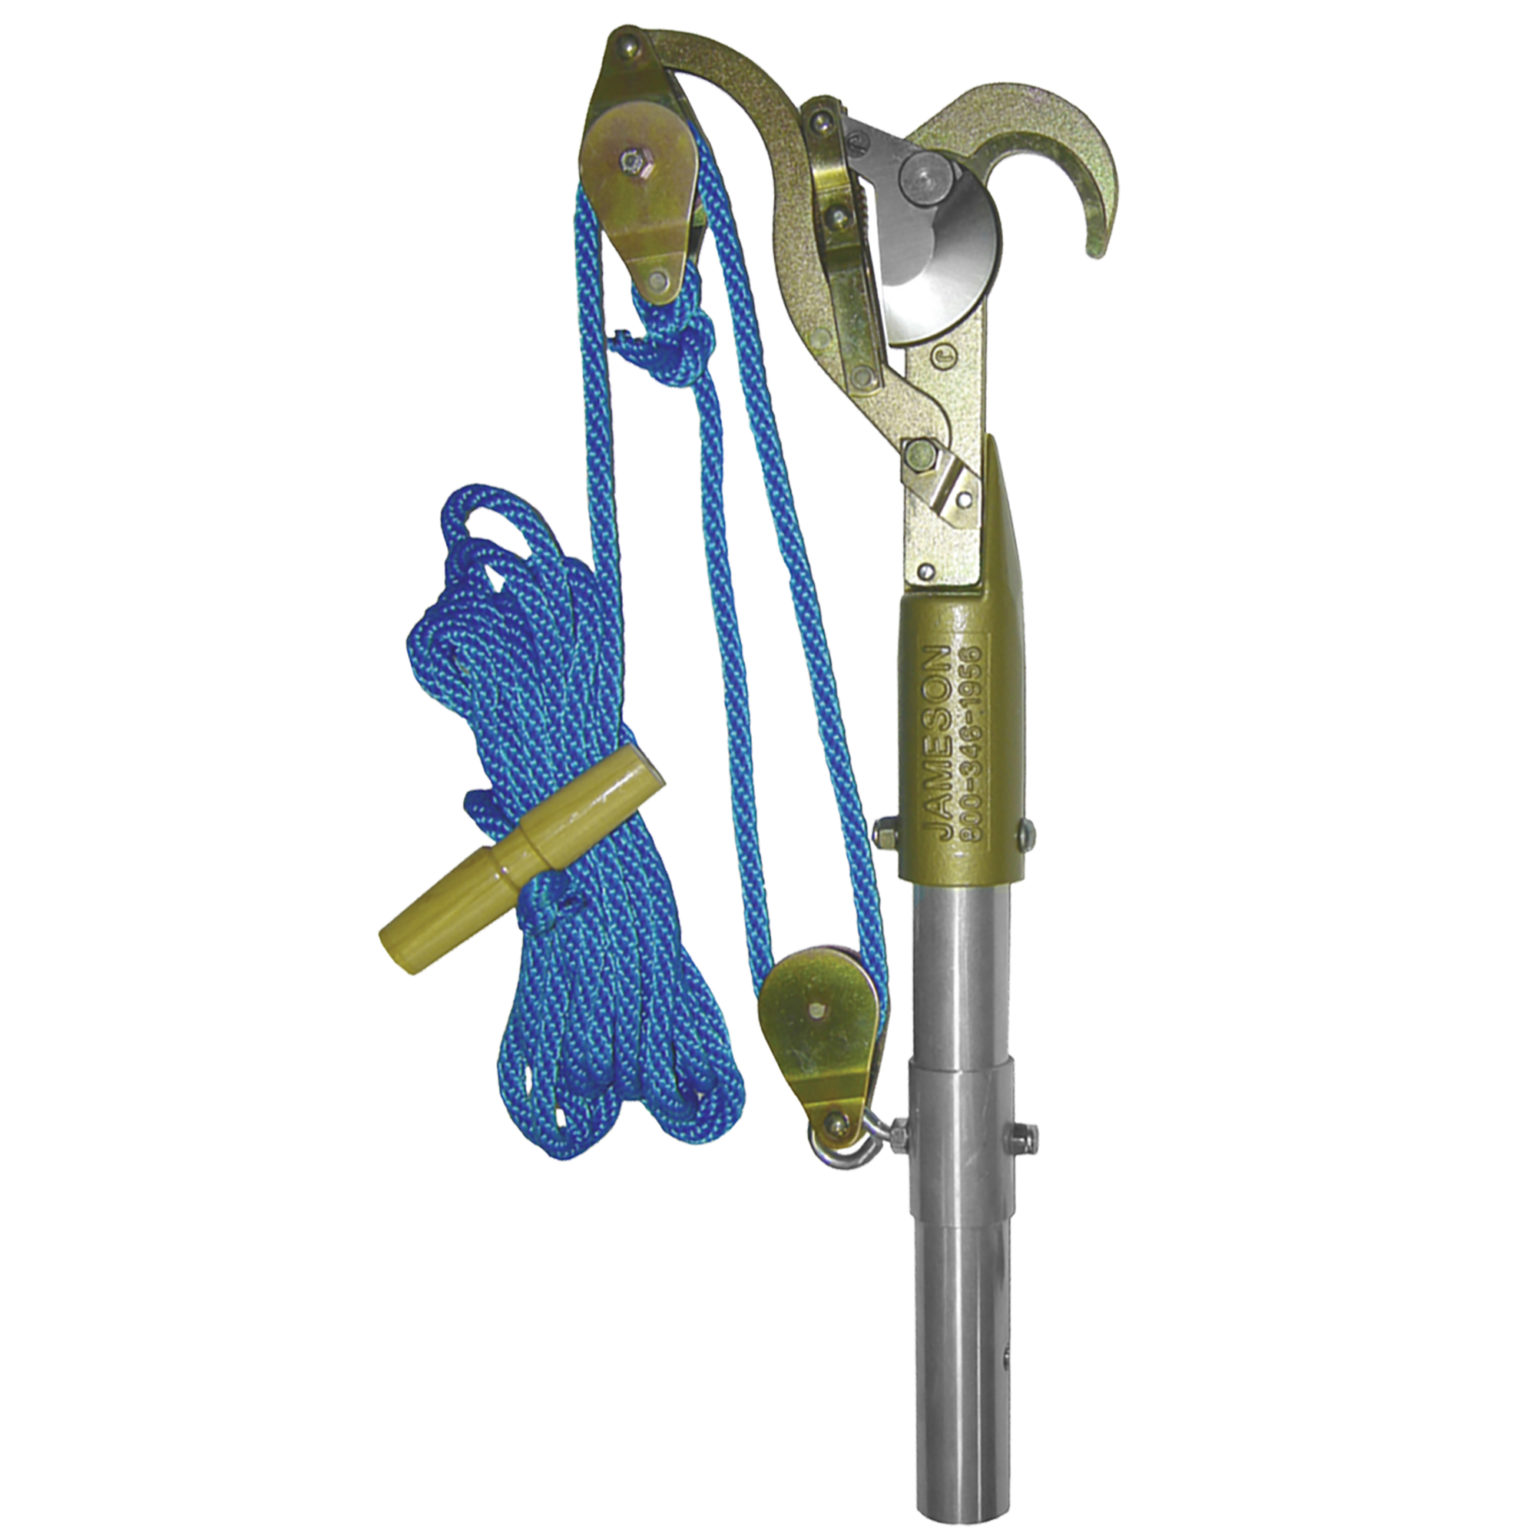 Double Pulley Big Mouth Pruner Kit, 1.75